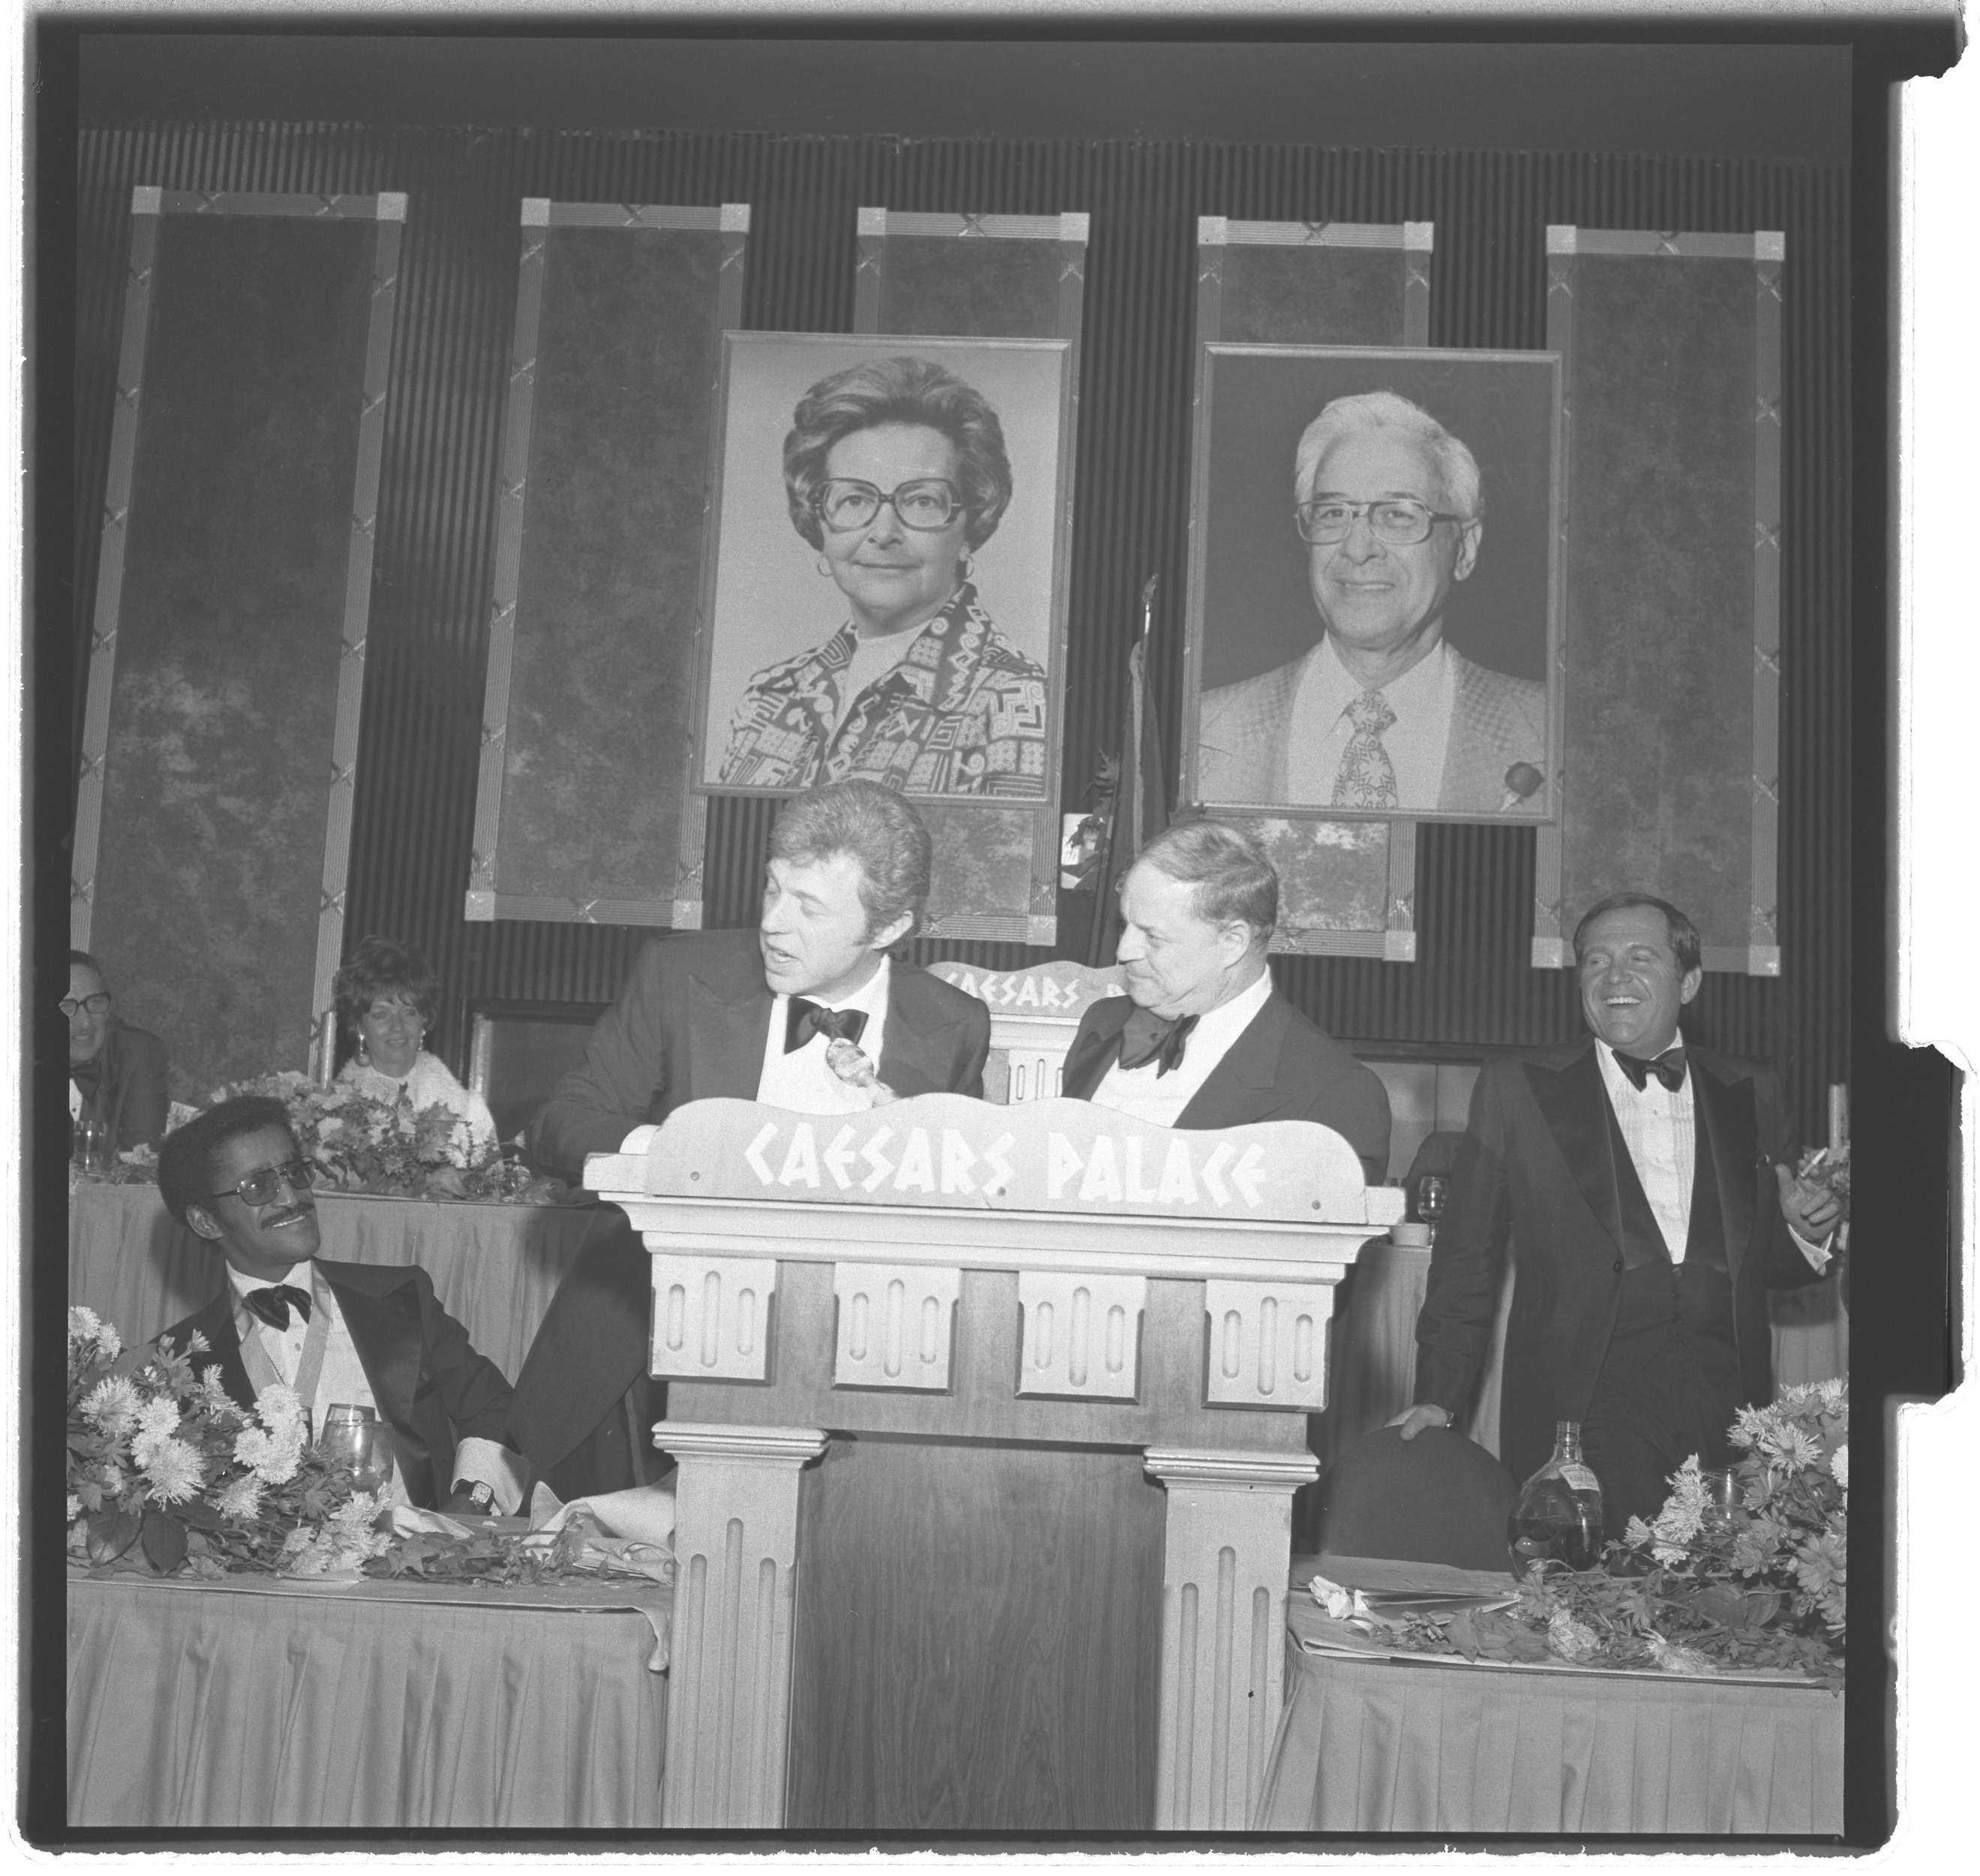 Photographs of the Combined Jewish Appeal Bonds of Israel (Honoring Jean and Billy weinberger), image 08